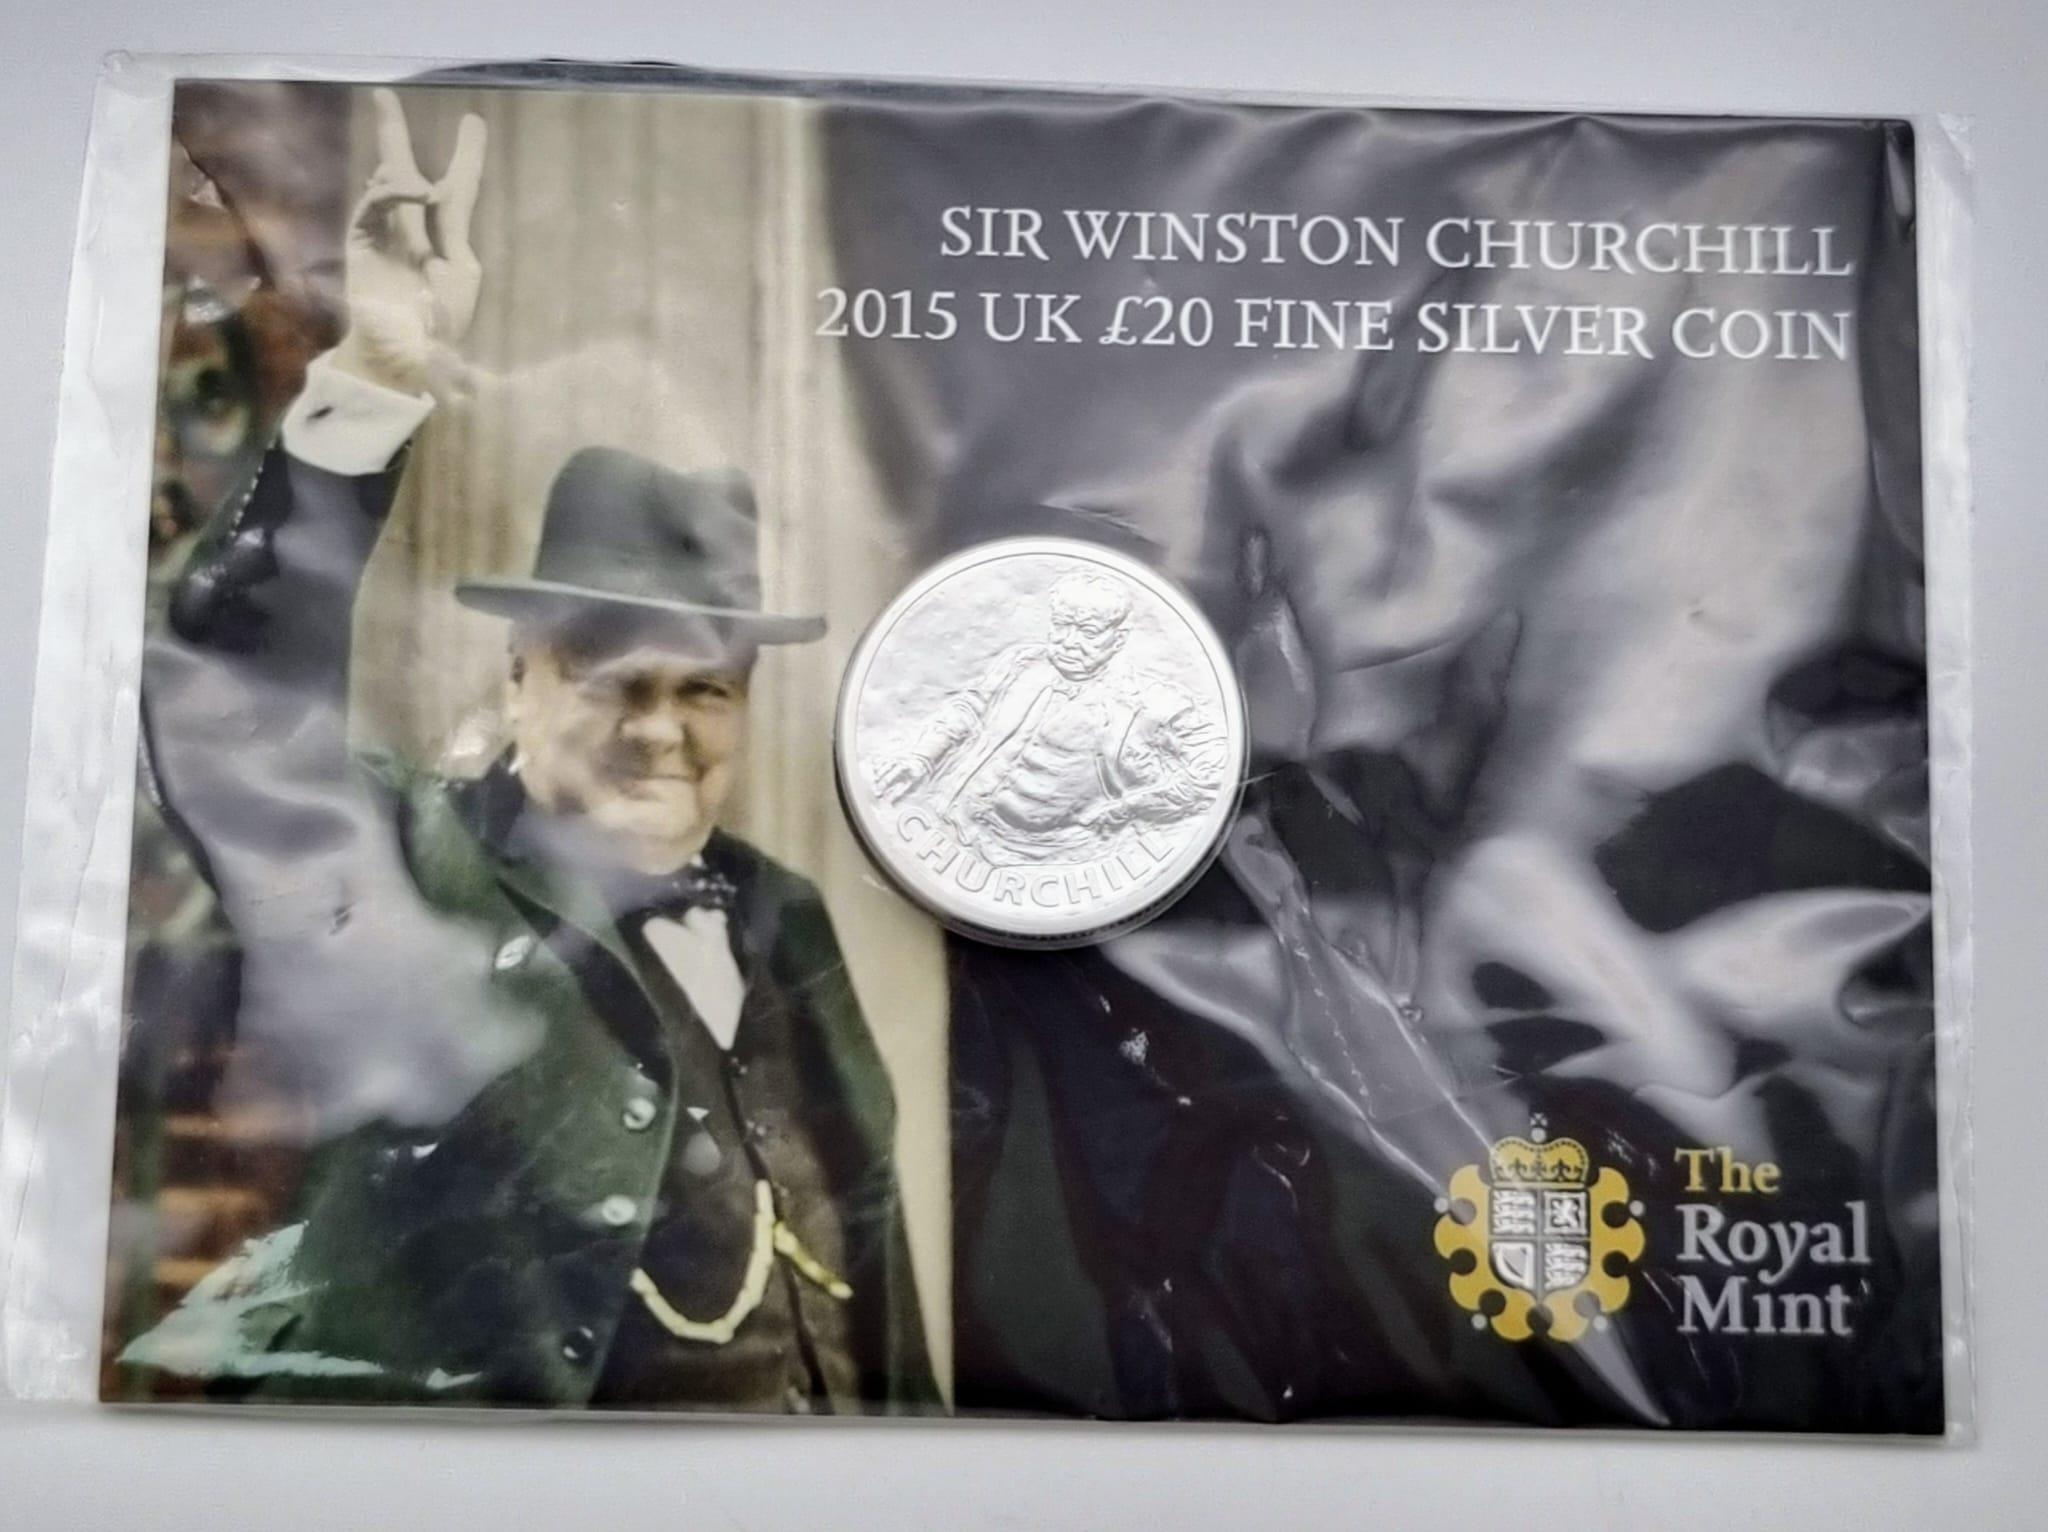 Mint Condition, Royal Mint ‘Sir Winston Churchill’ 2015 £20 Fine Silver Coin in unopened pack